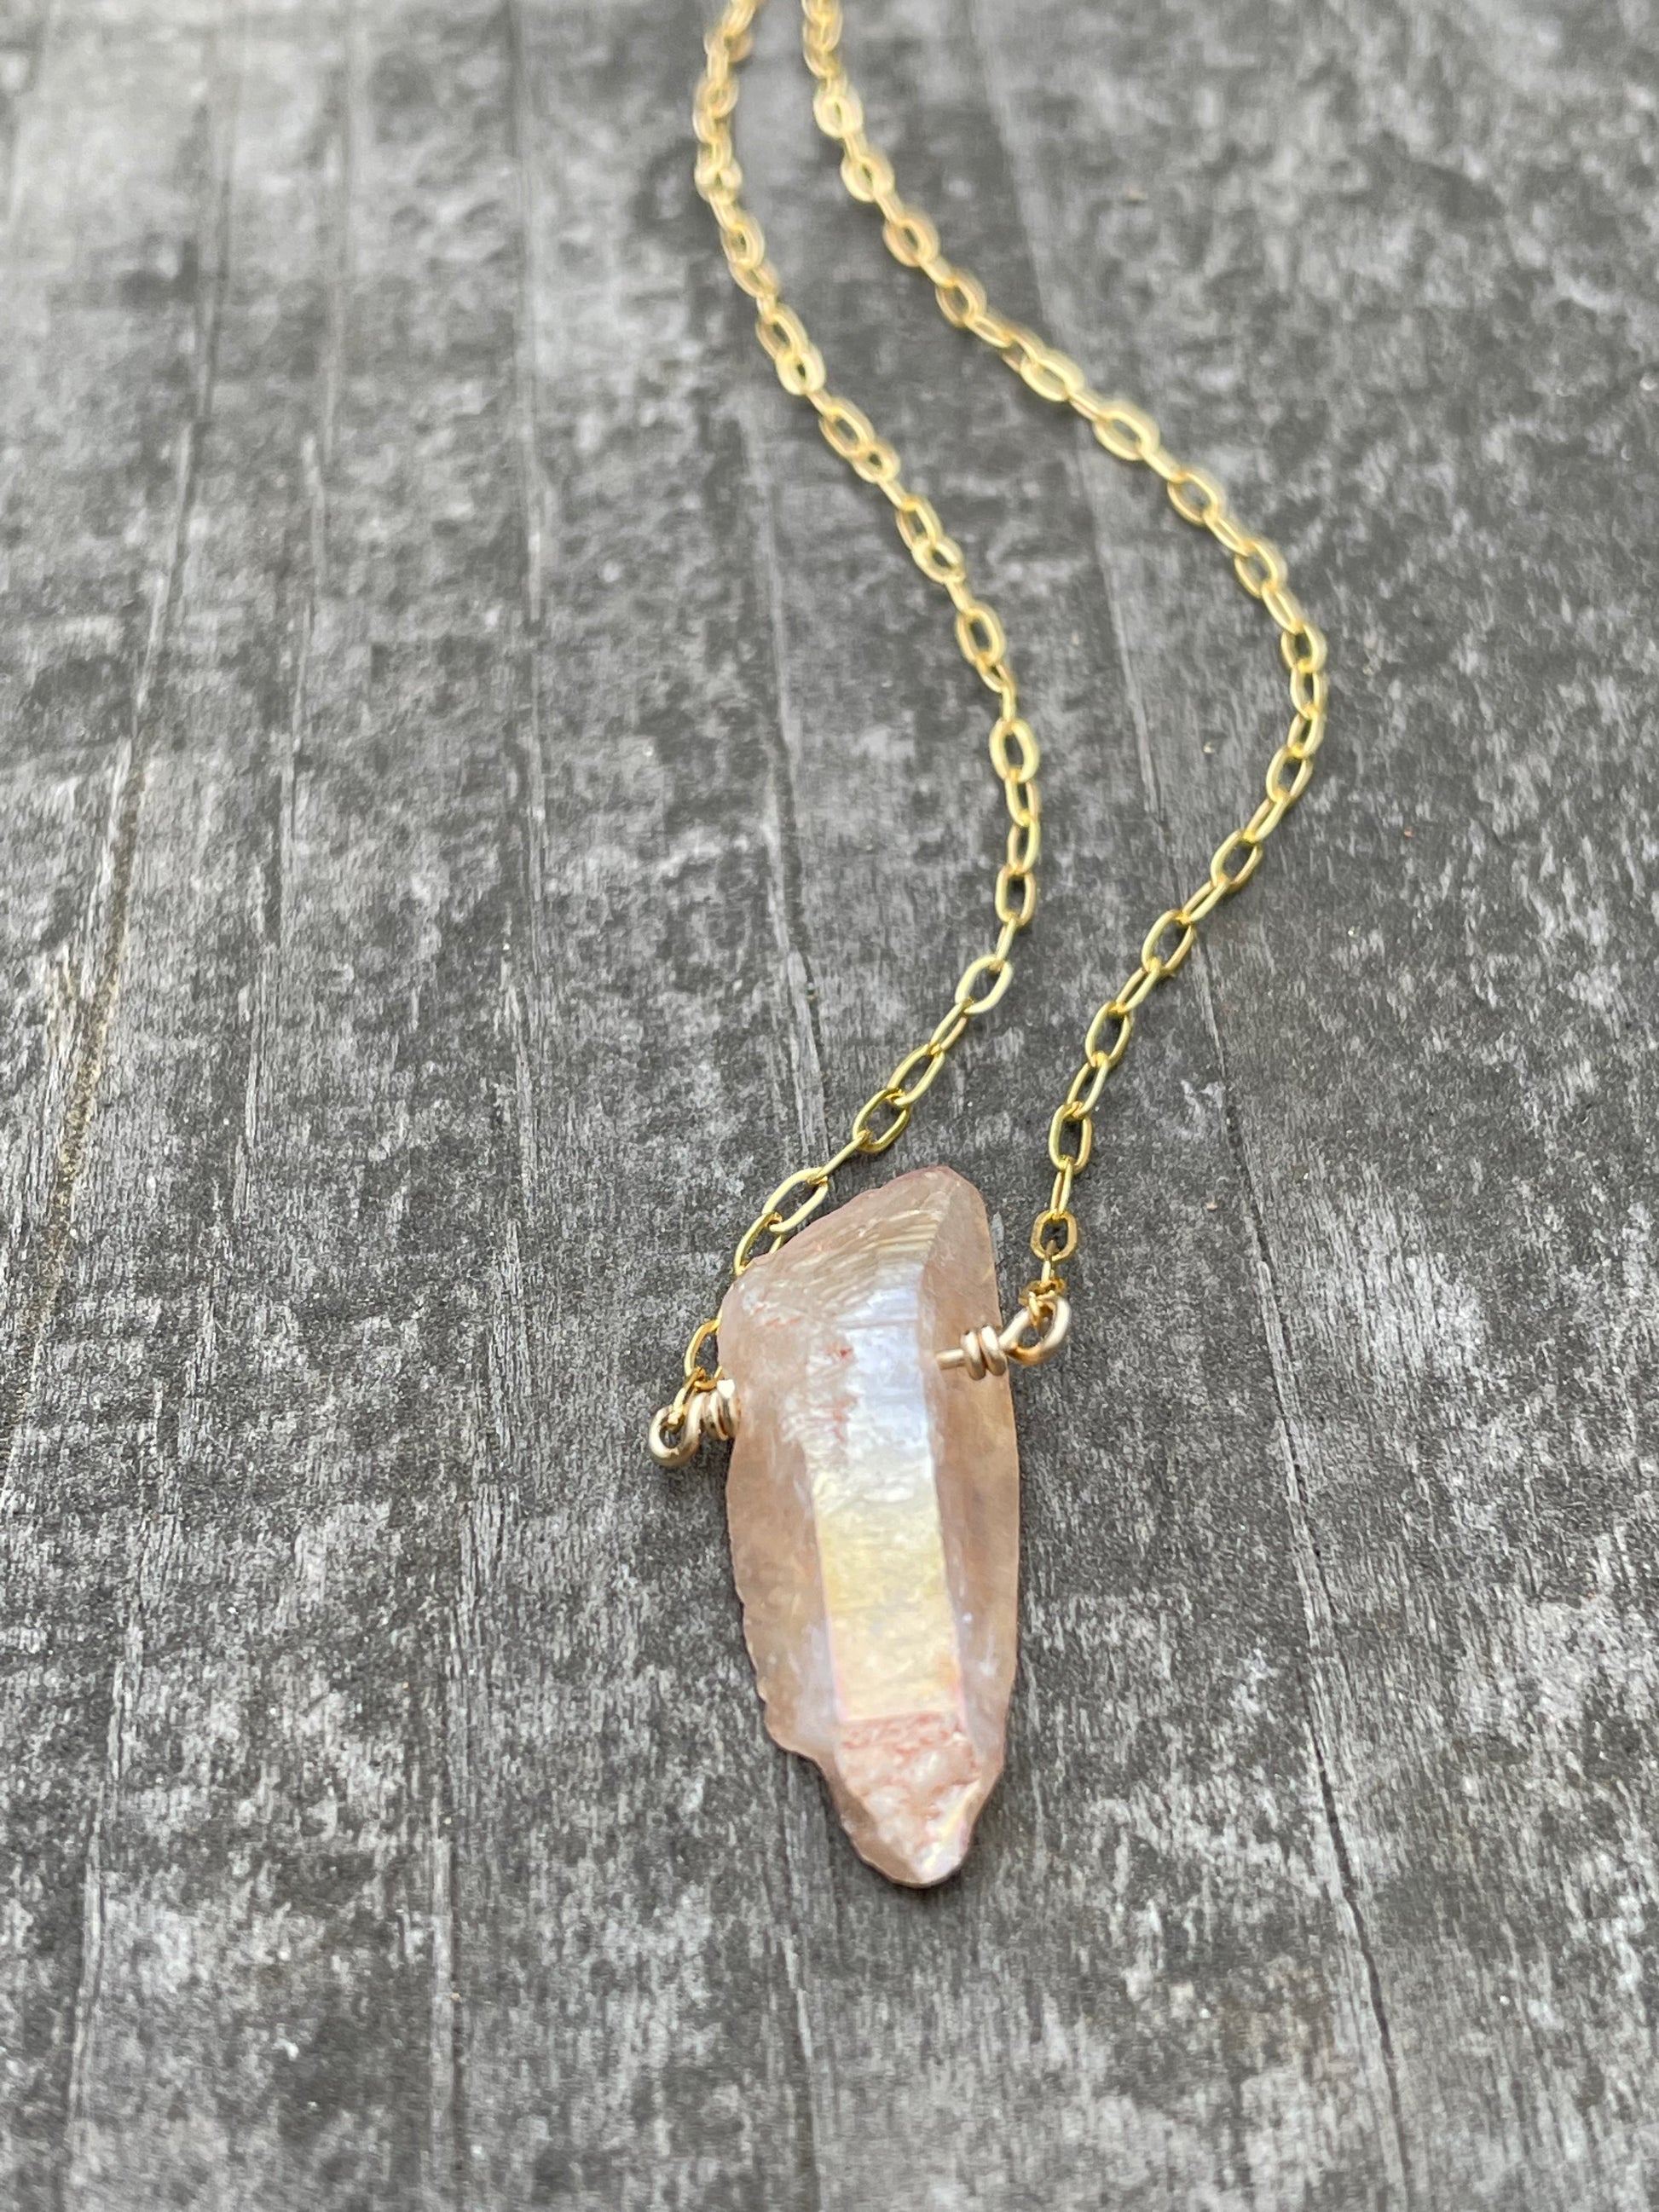 Peach sheen on a quartz crystal wire wrapped onto a gold chain on a wooden background.